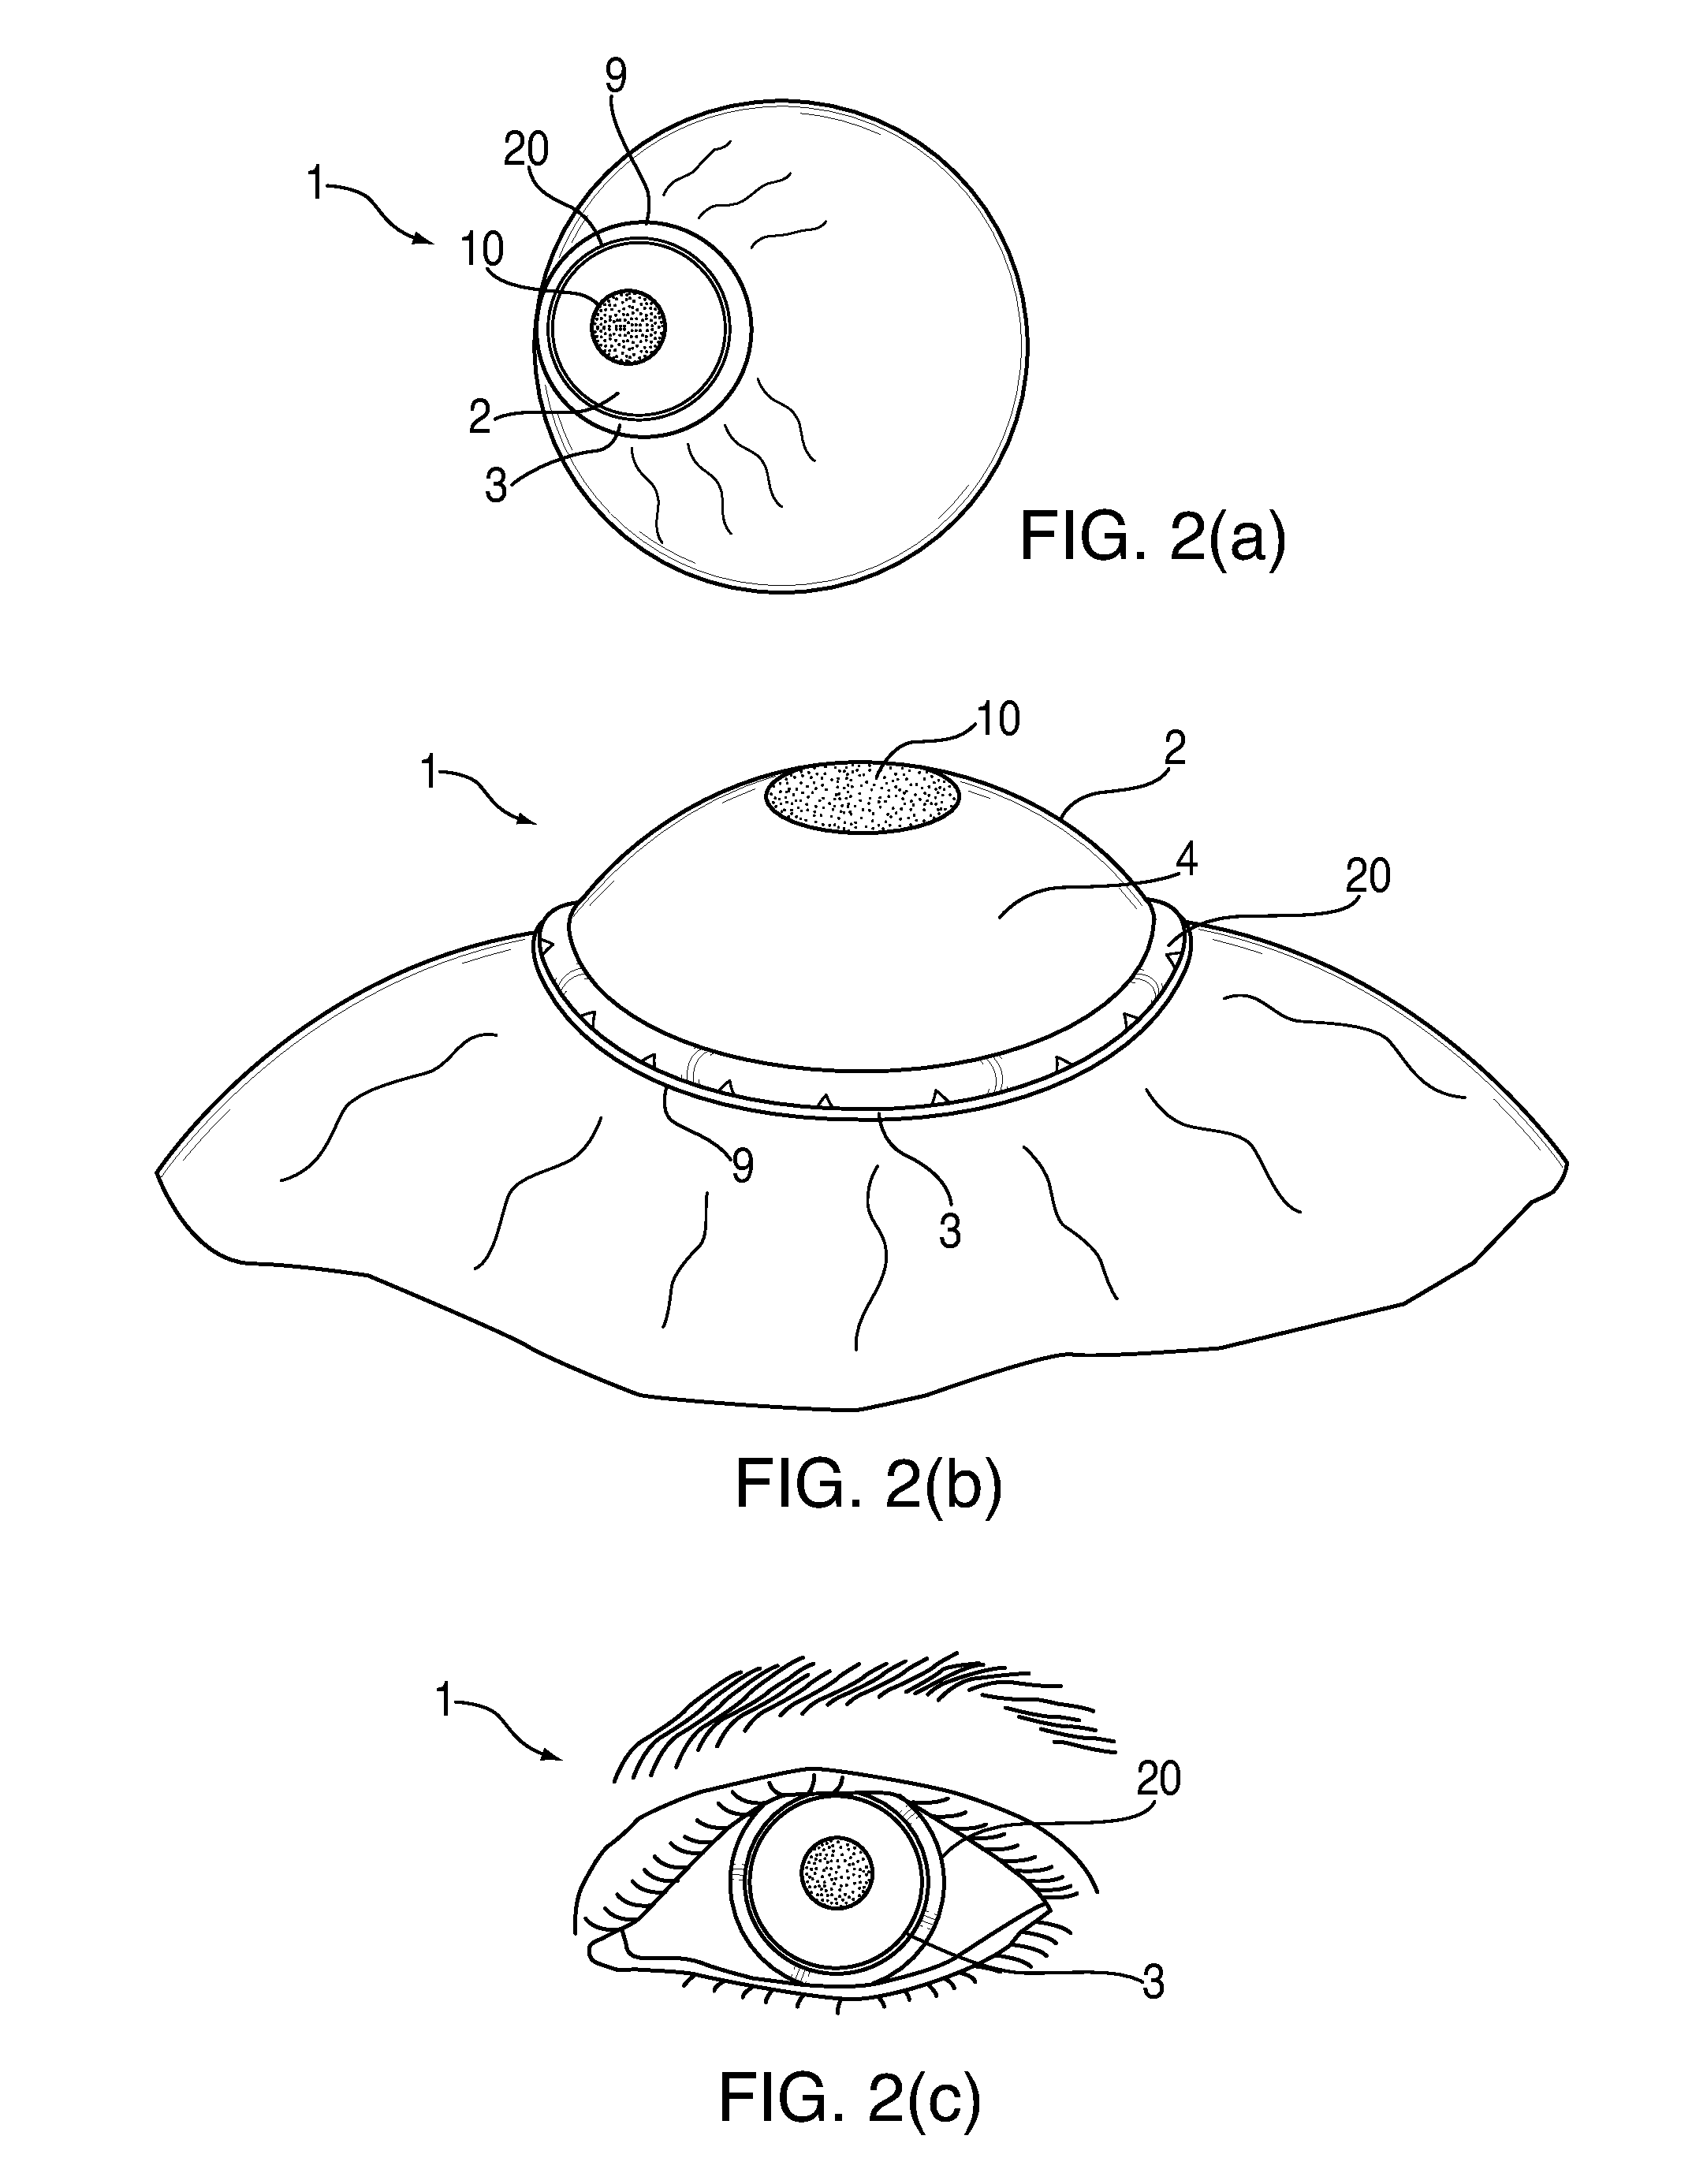 System and device for correcting hyperopia, myopia and presbyopia